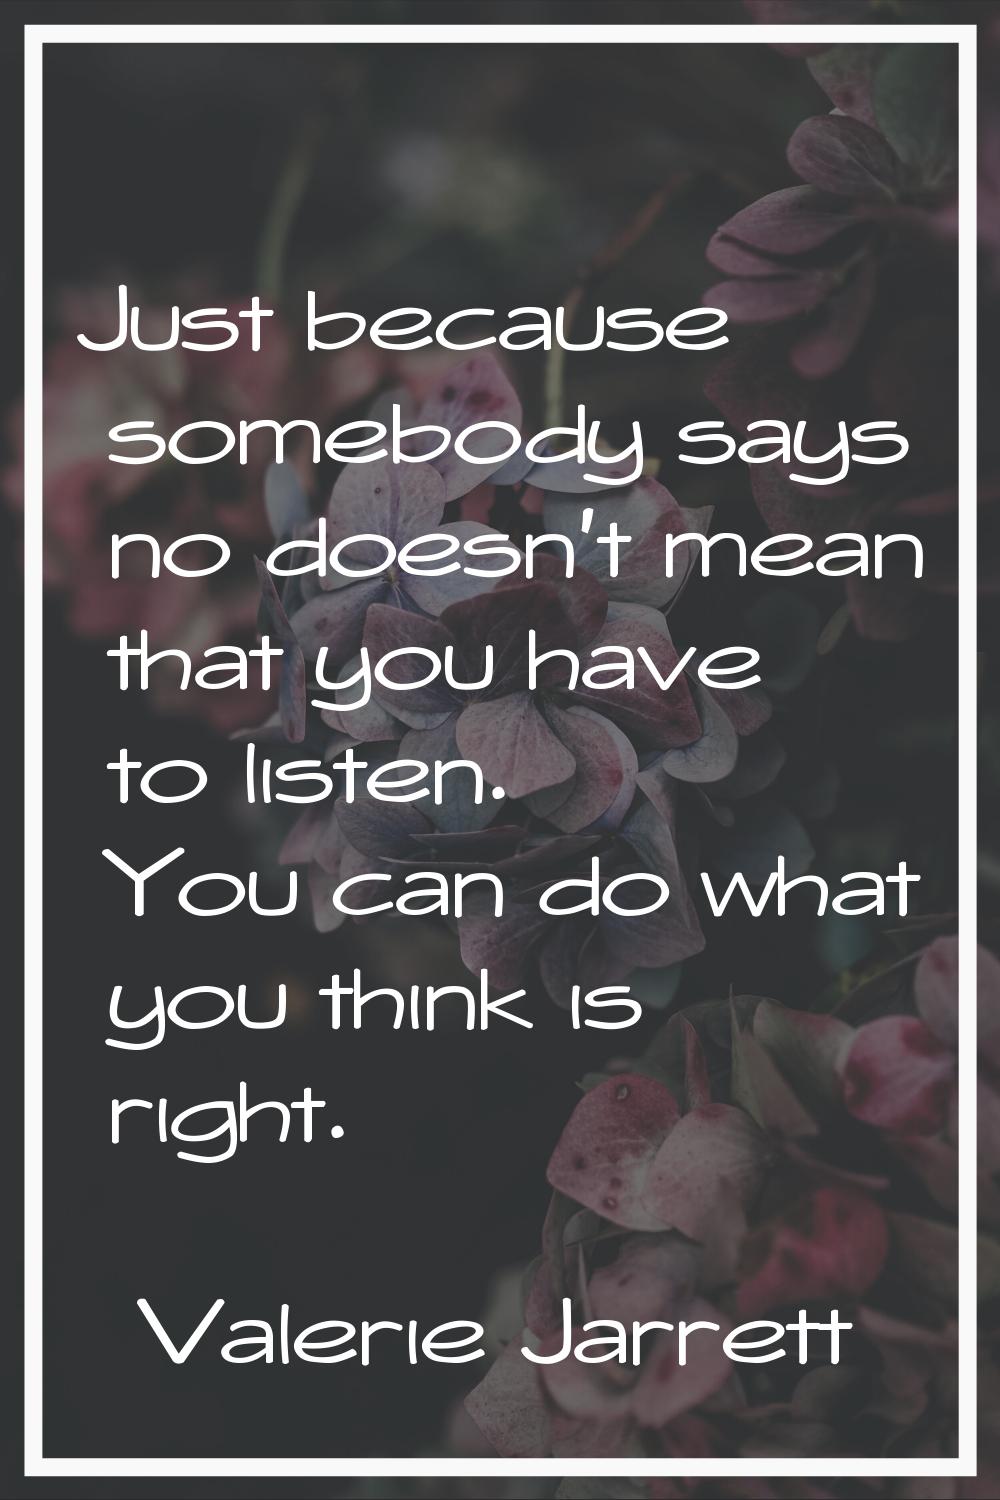 Just because somebody says no doesn't mean that you have to listen. You can do what you think is ri